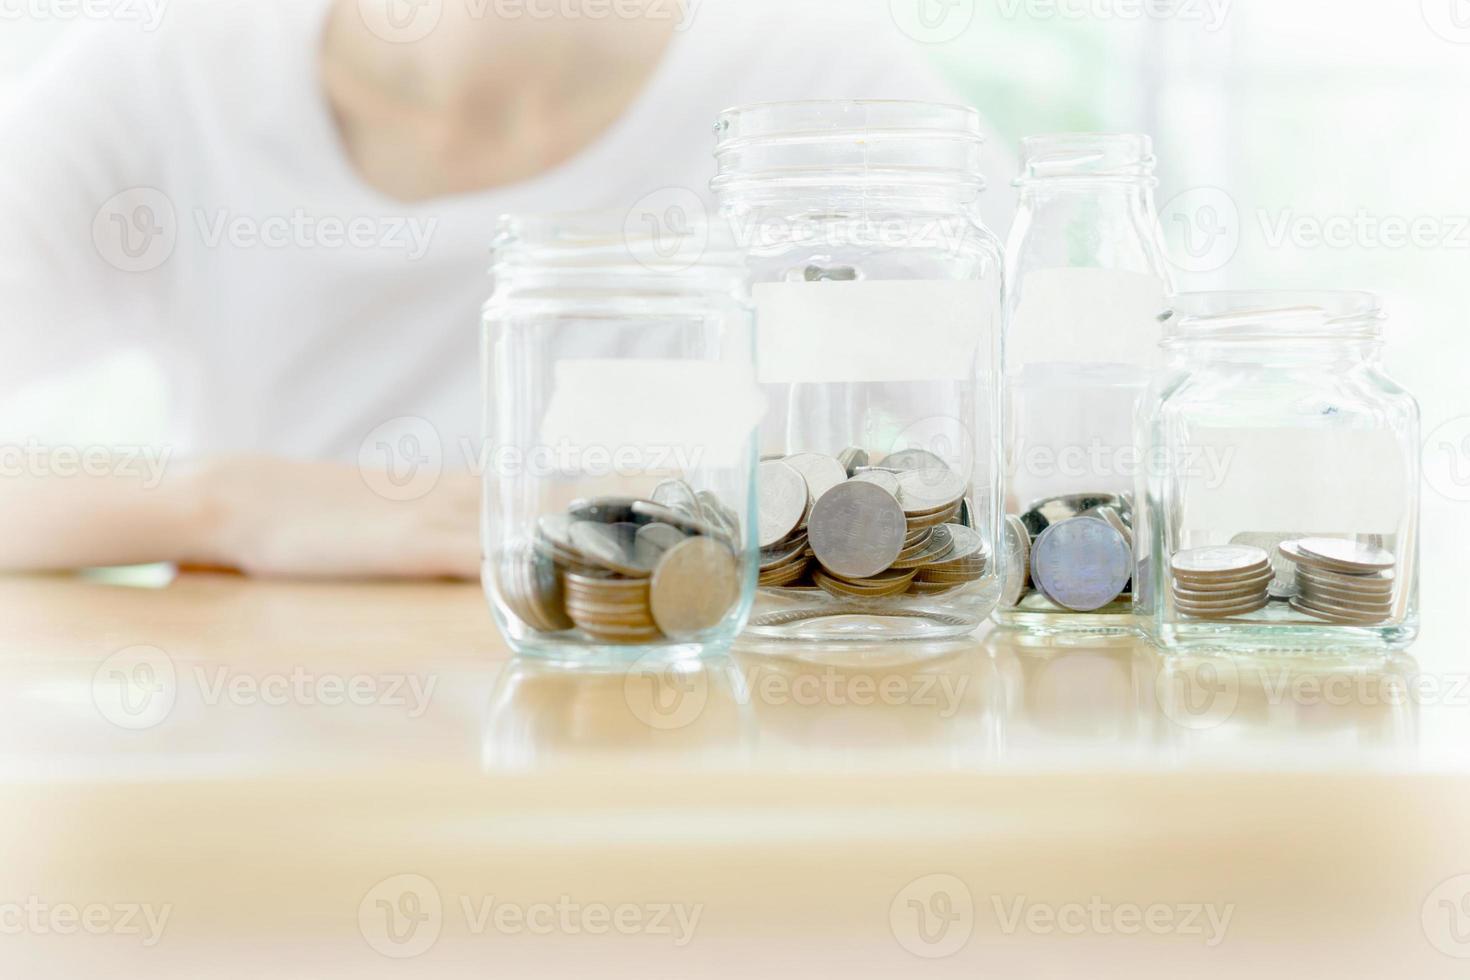 The woman hid behind a jar full of coins photo